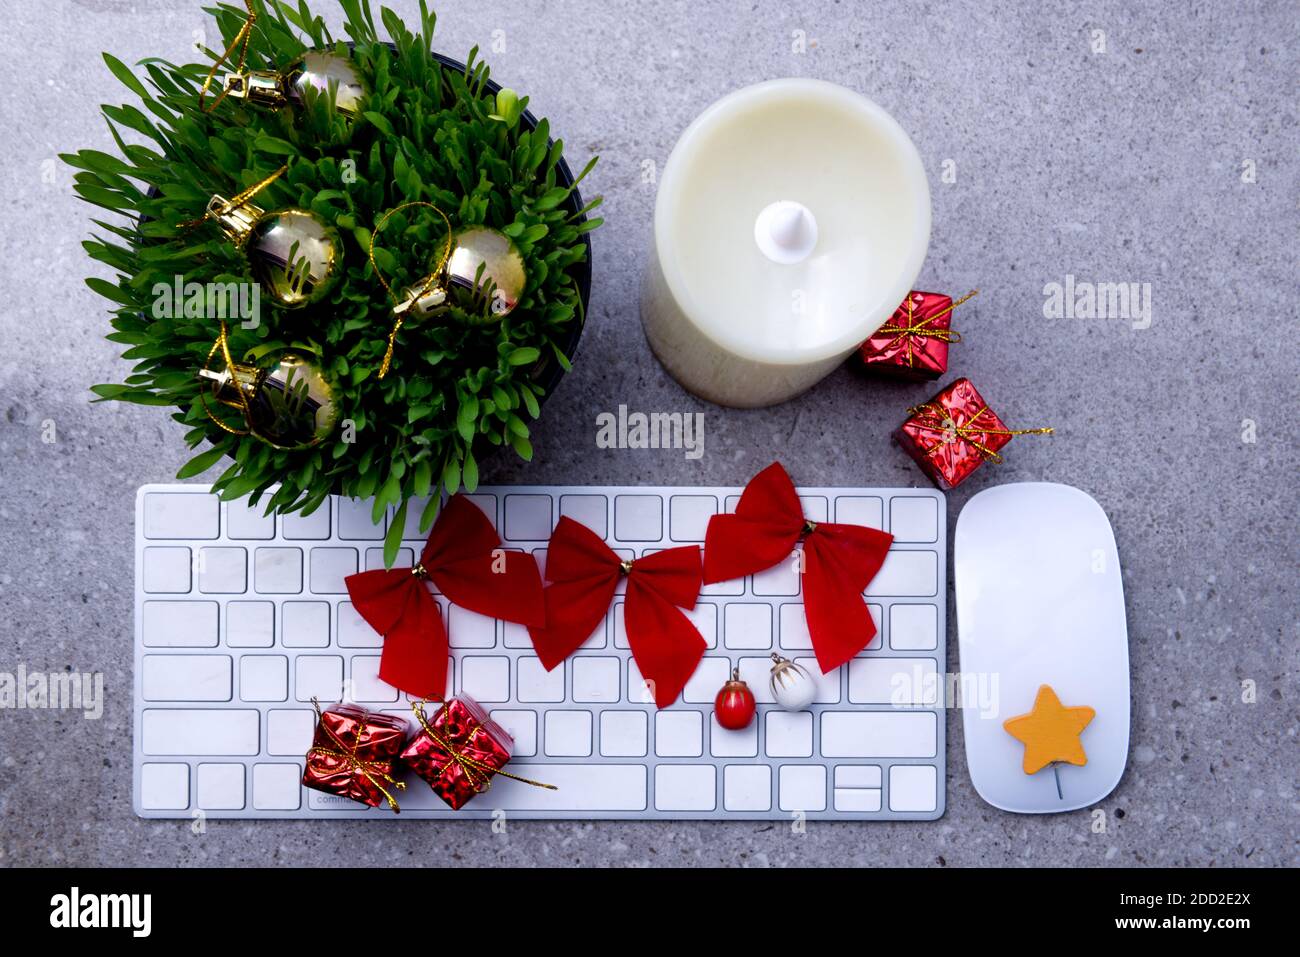 Close up view of millet grass plant in the pot with christmas decoration and the keyboard on the desk Stock Photo